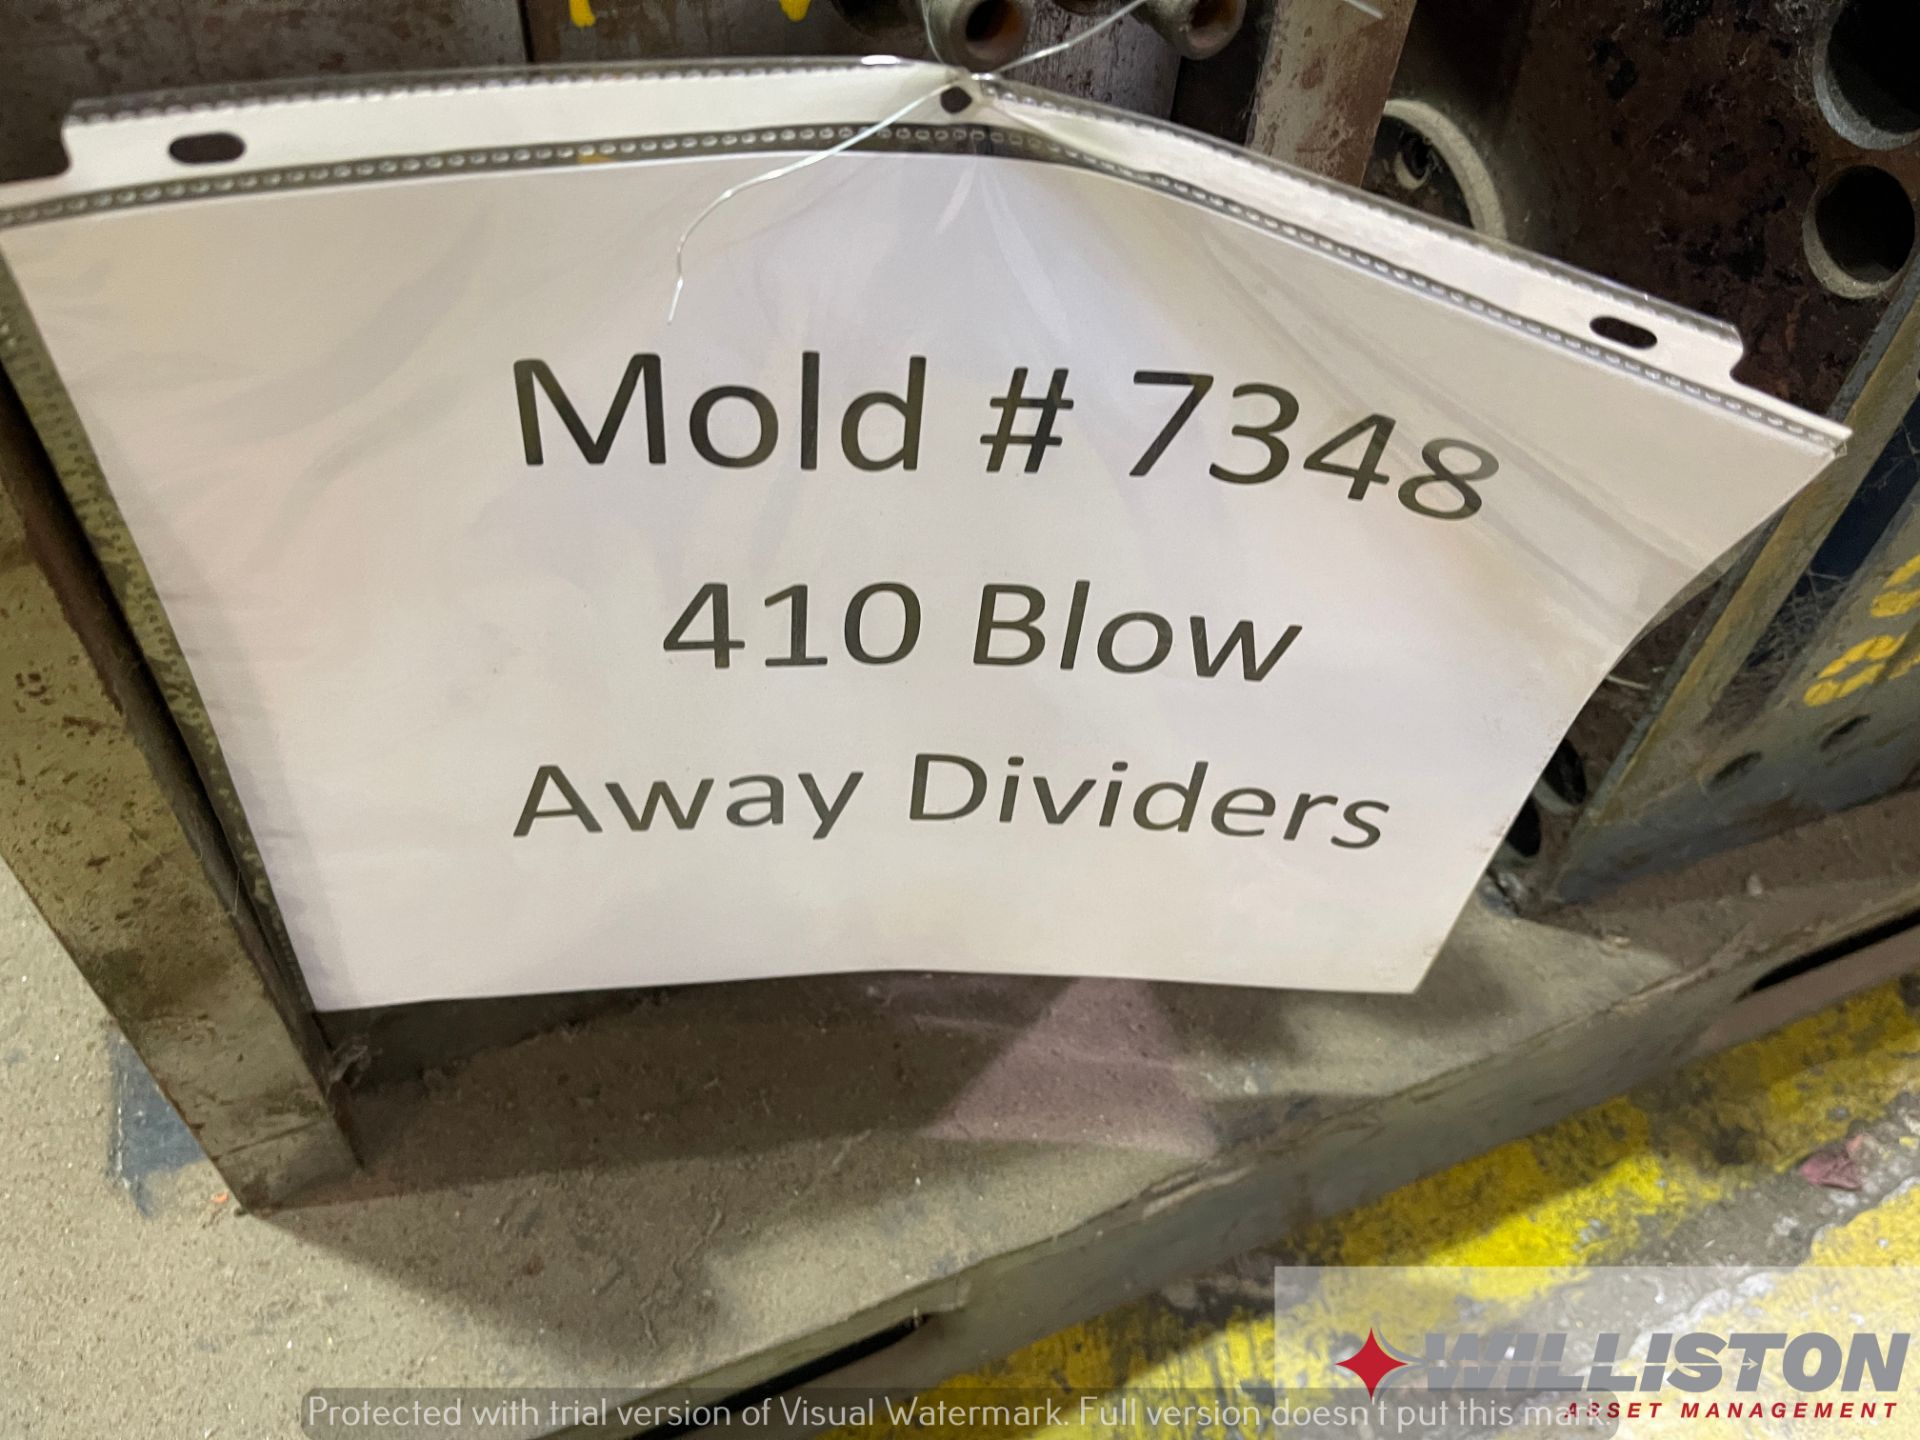 PLASTIC INJECTION MOLD - 410 blow away dividers - Image 3 of 7